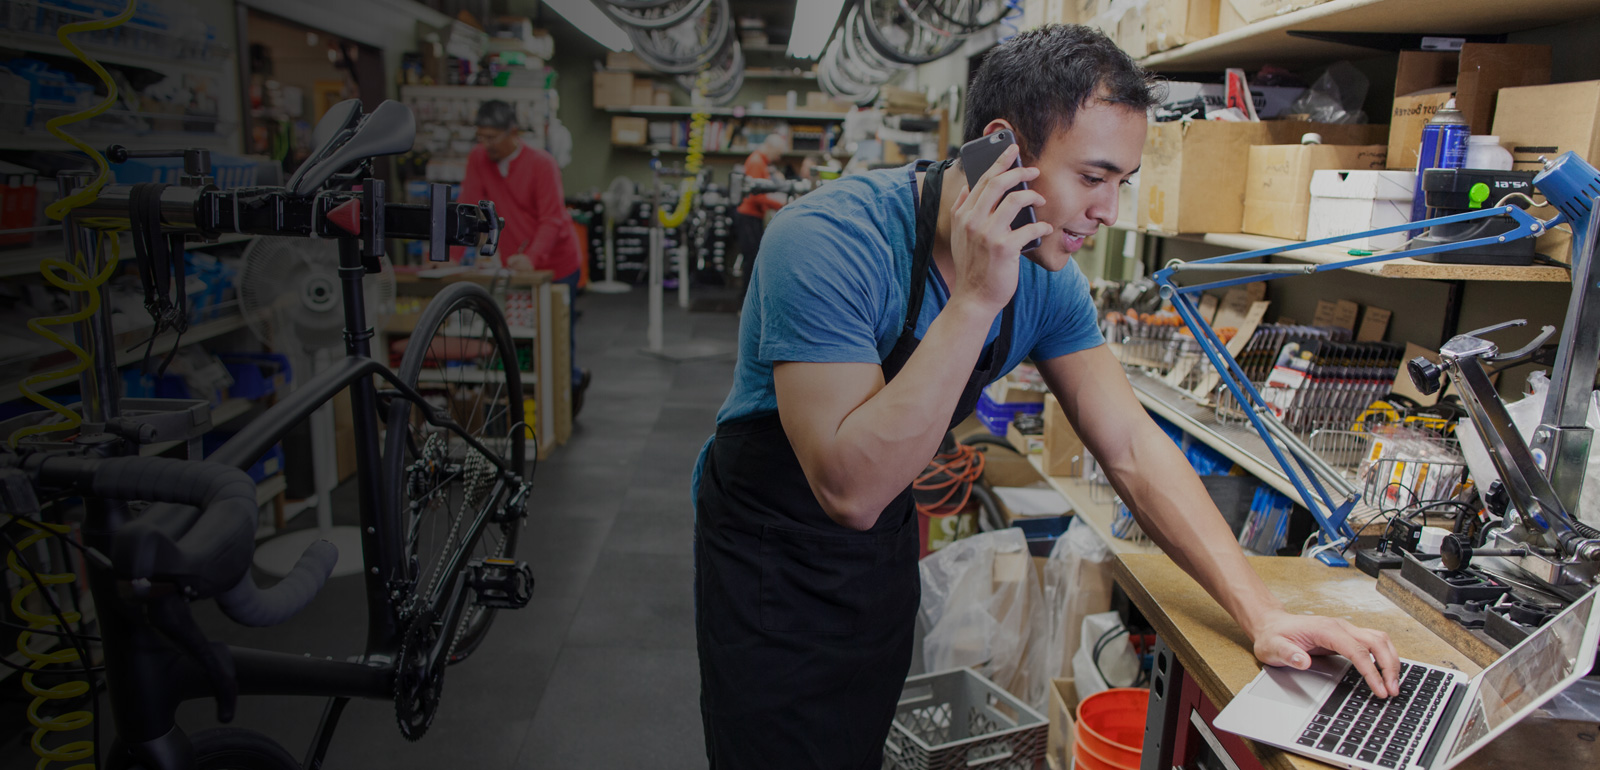 Man smiles while talking on the phone at a bike repair shop.